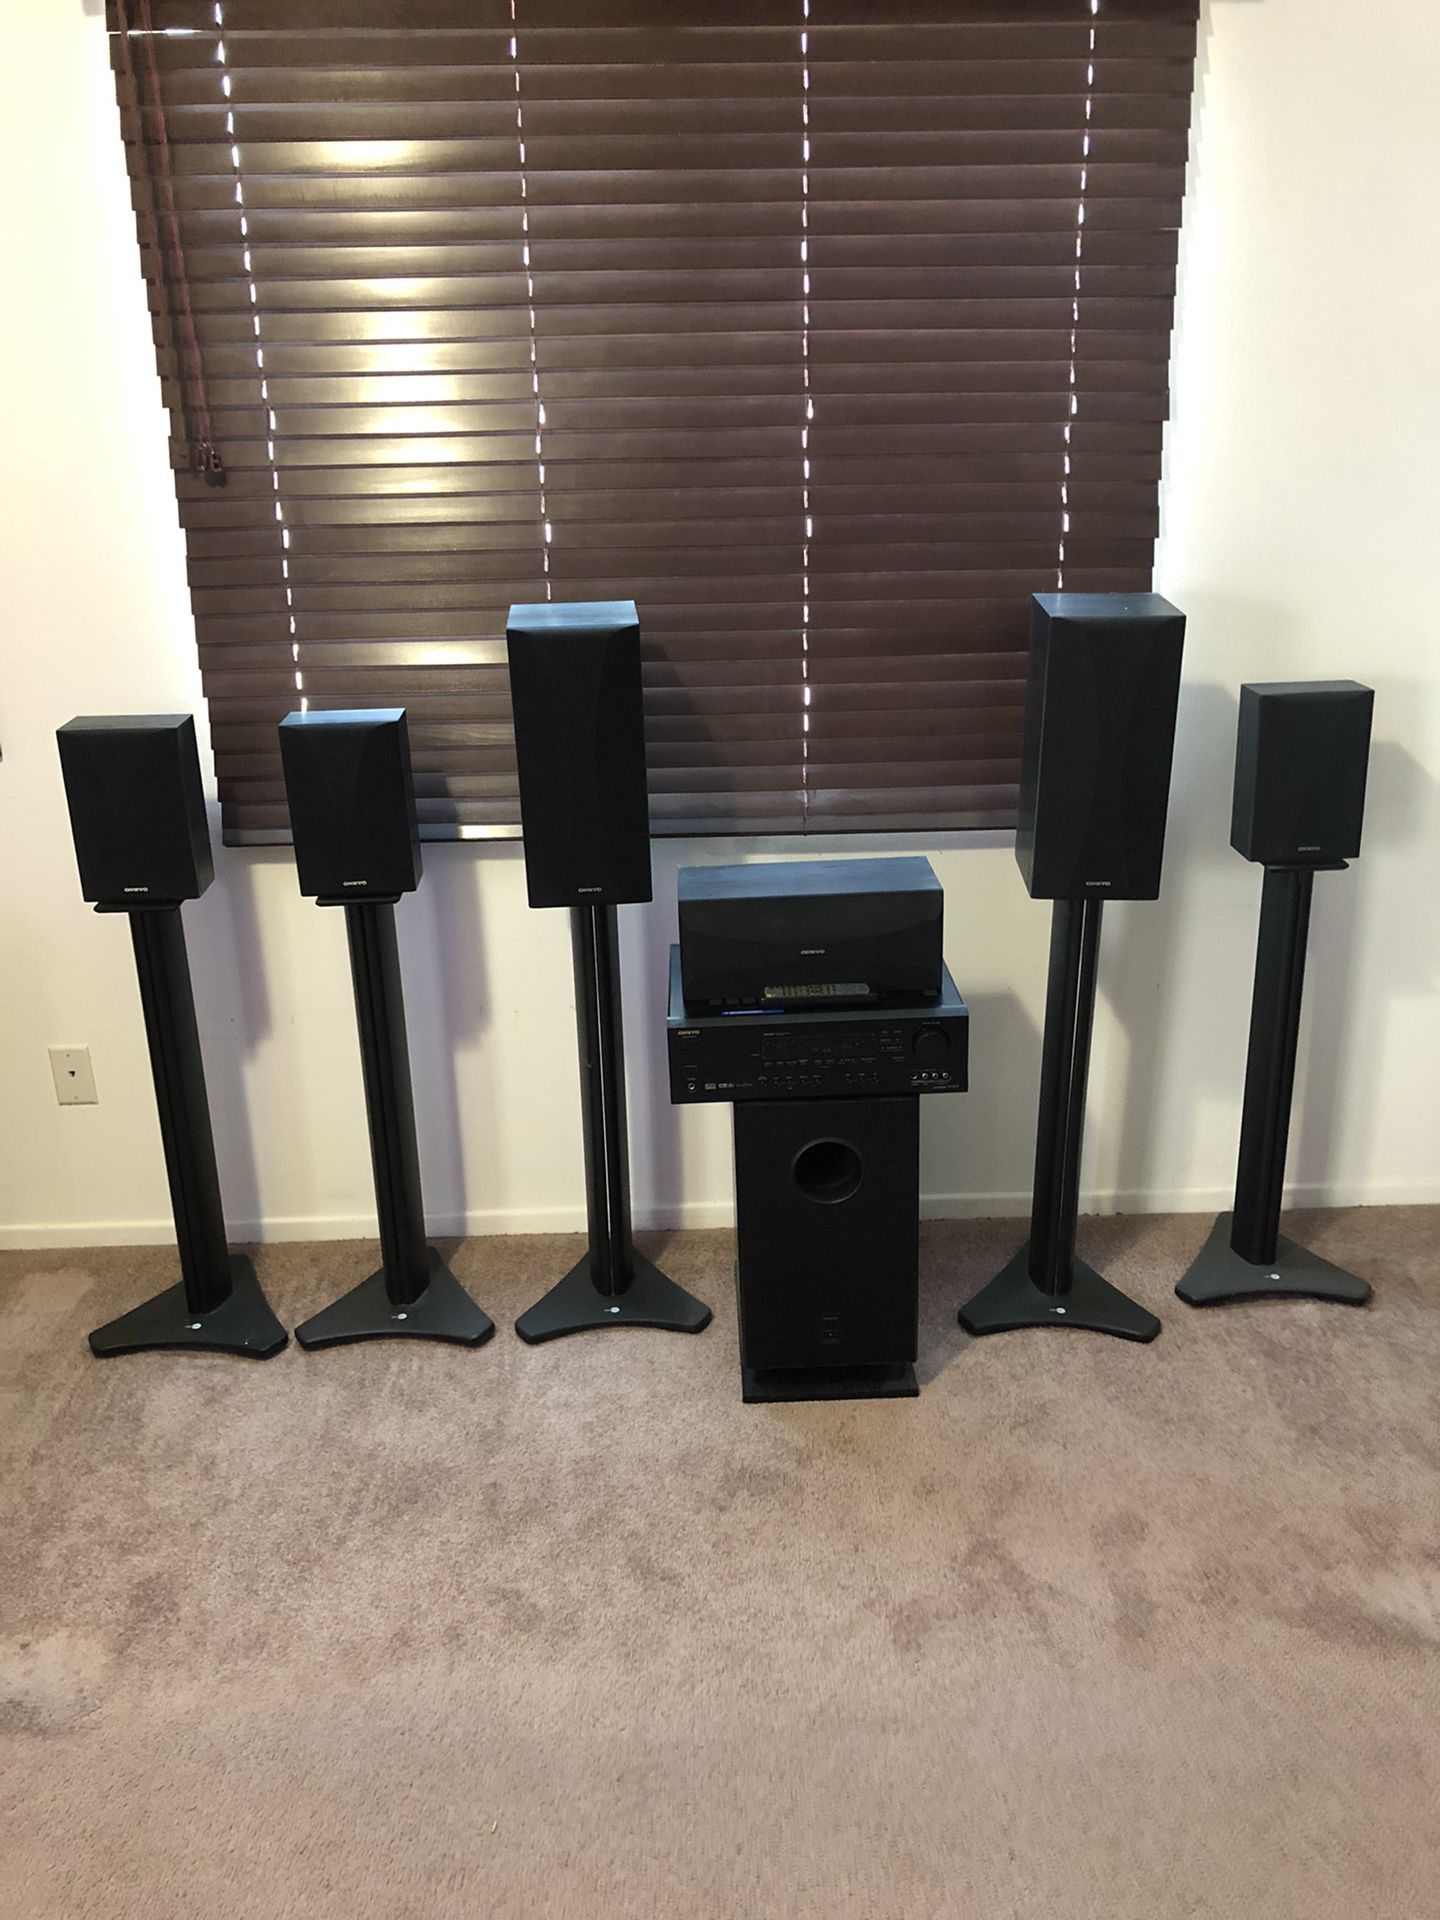 Onkyo 7.1 Channel HT-R510 HoAudio Theater Receiver and Speaker Package, Front/Center Speaker, 4 Surround Speakers, Subwoofer and Receiver. Excellen